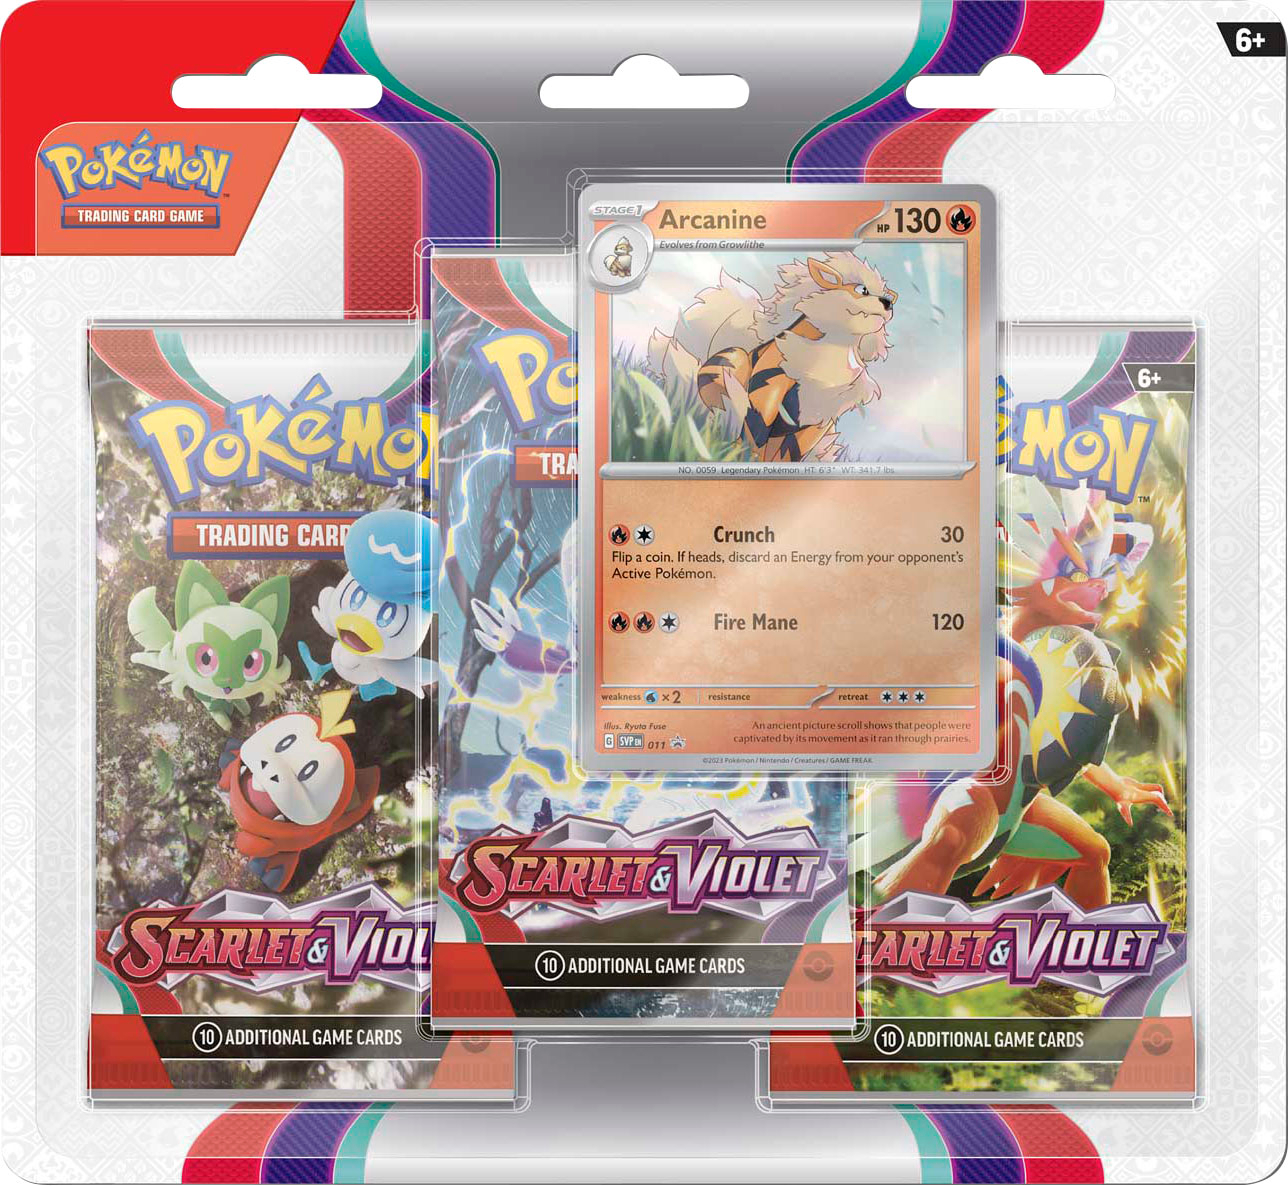 Pokemon Trading Card Game: Scarlet and Violet Paradox Rift Elite Trainer  Box (Styles May Vary)